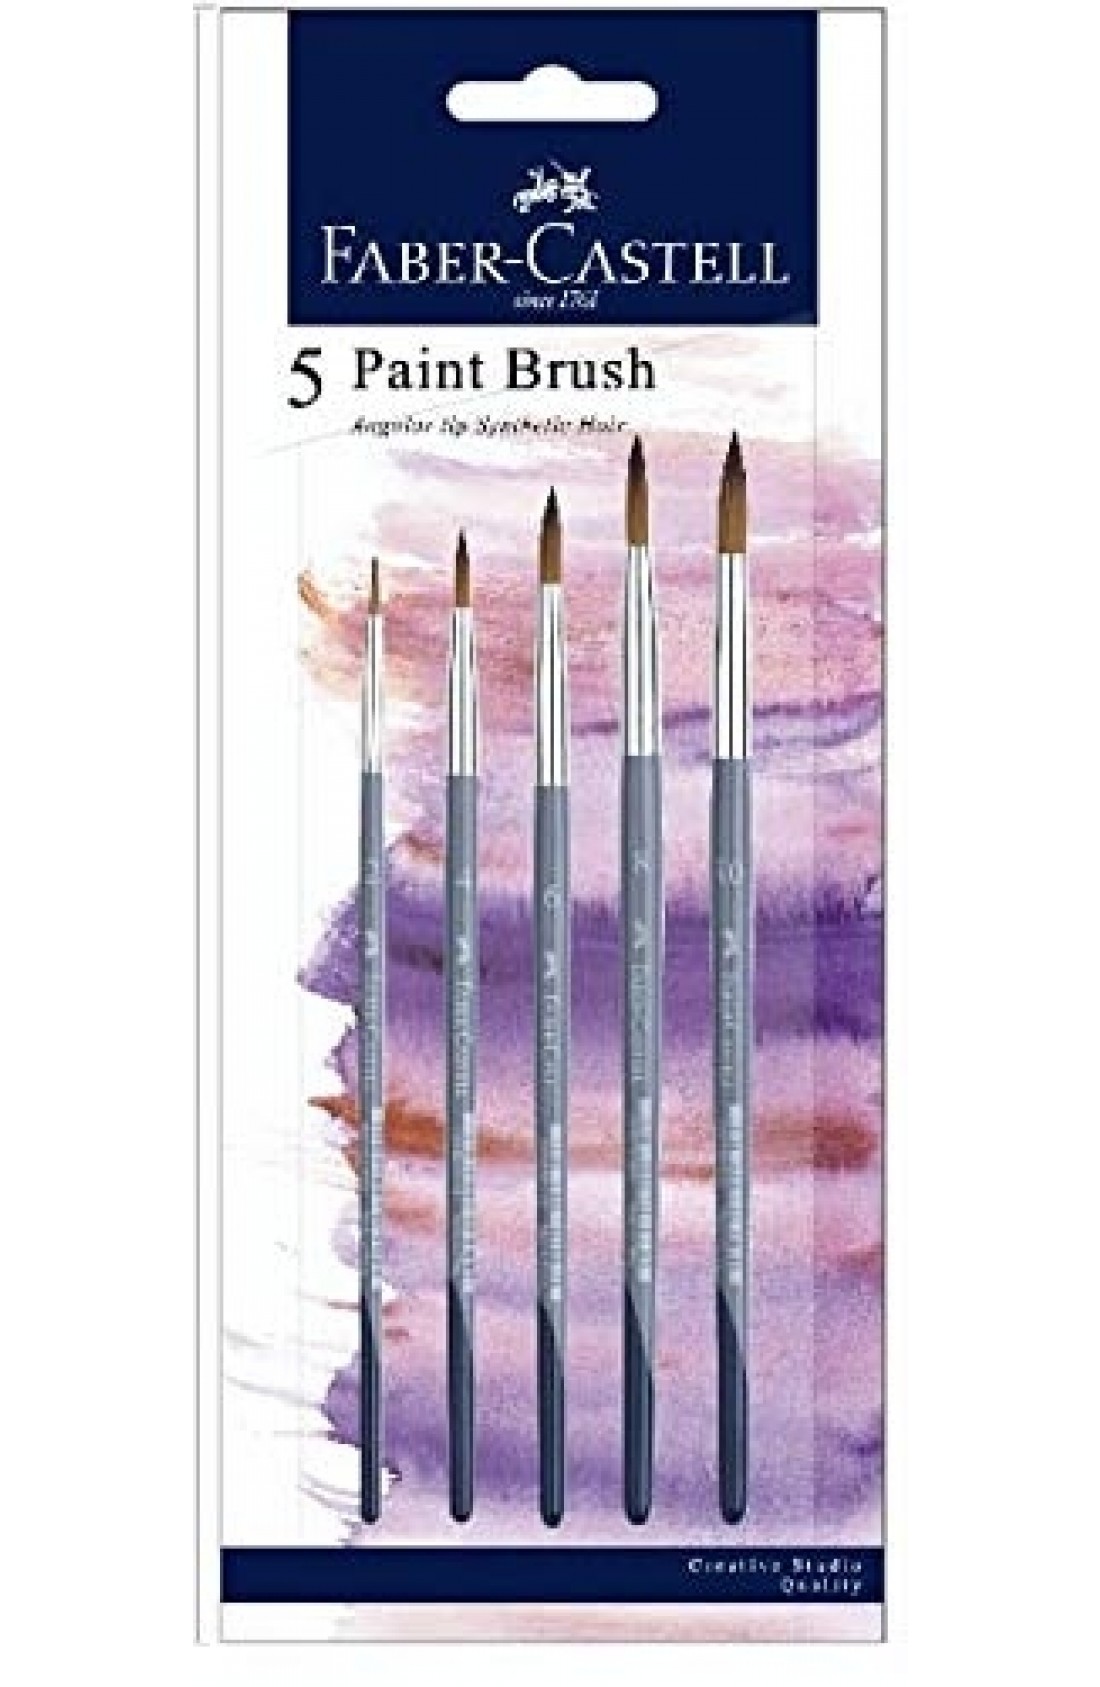 Faber-Castell Flat Synthetic Round Brushes (6,8,12,14,16)